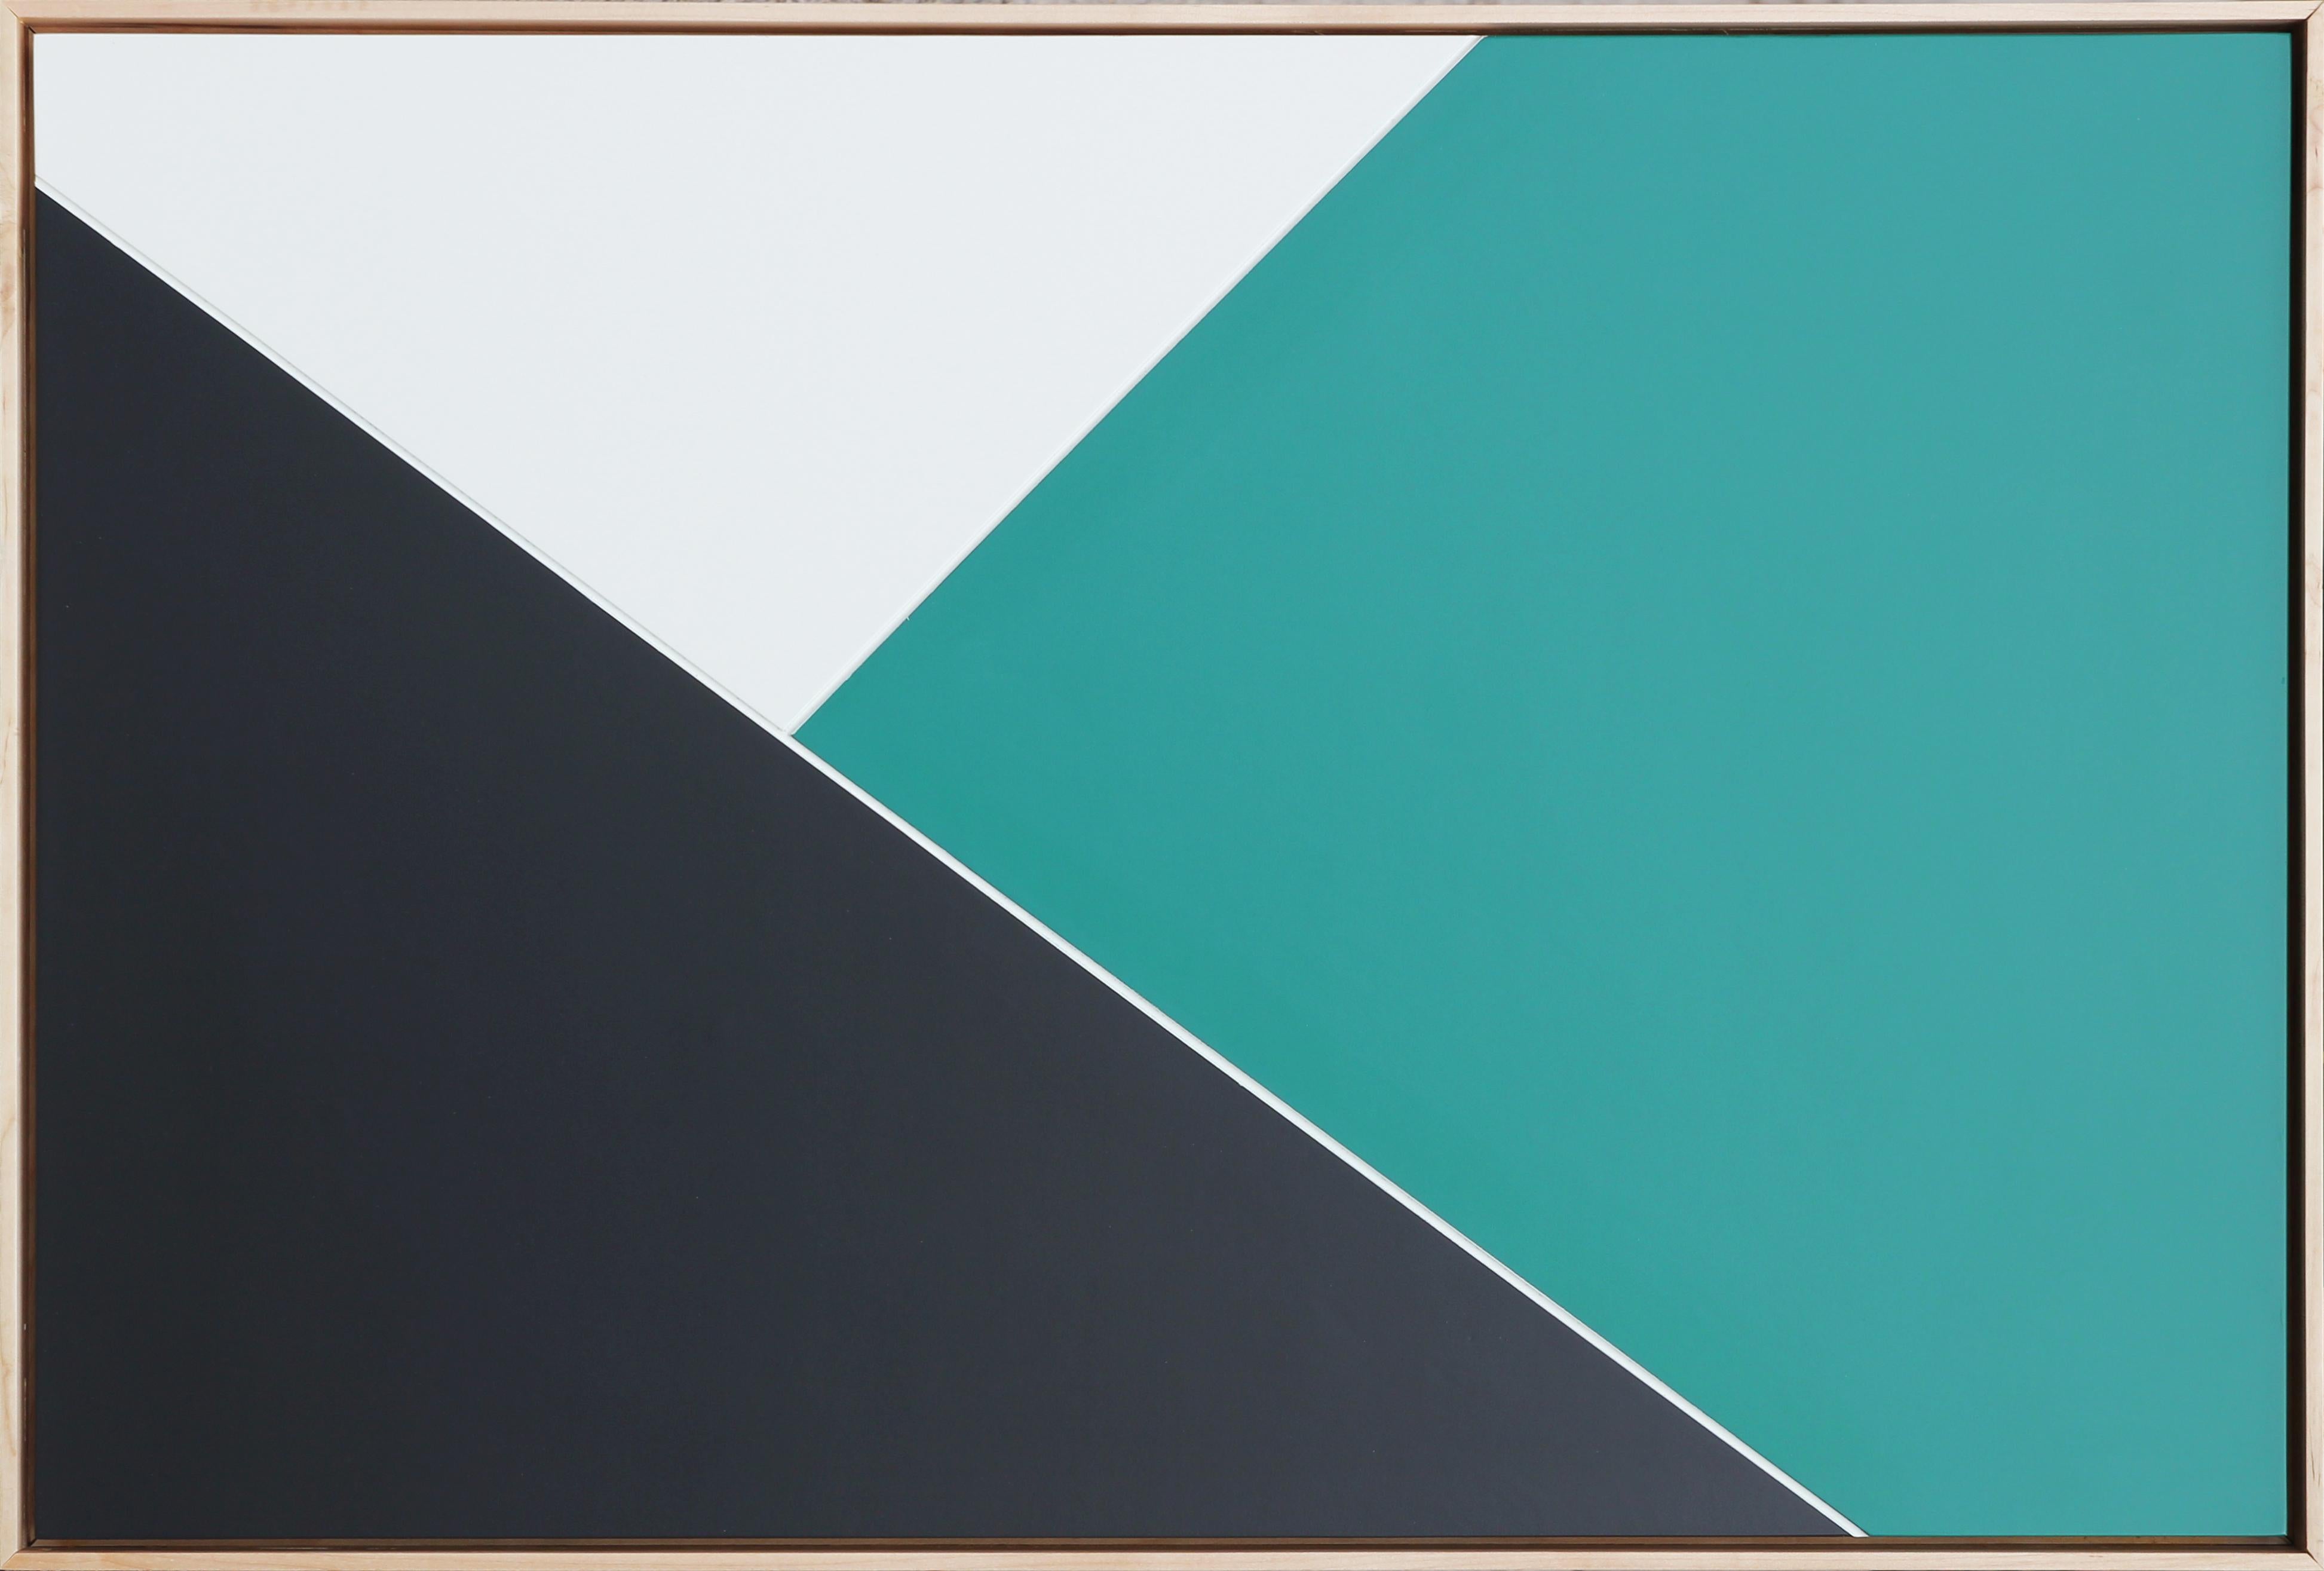 Matthew Reeves Abstract Painting - “Point Blank” White, Teal, and Black Abstract Geometric Mixed Media Painting